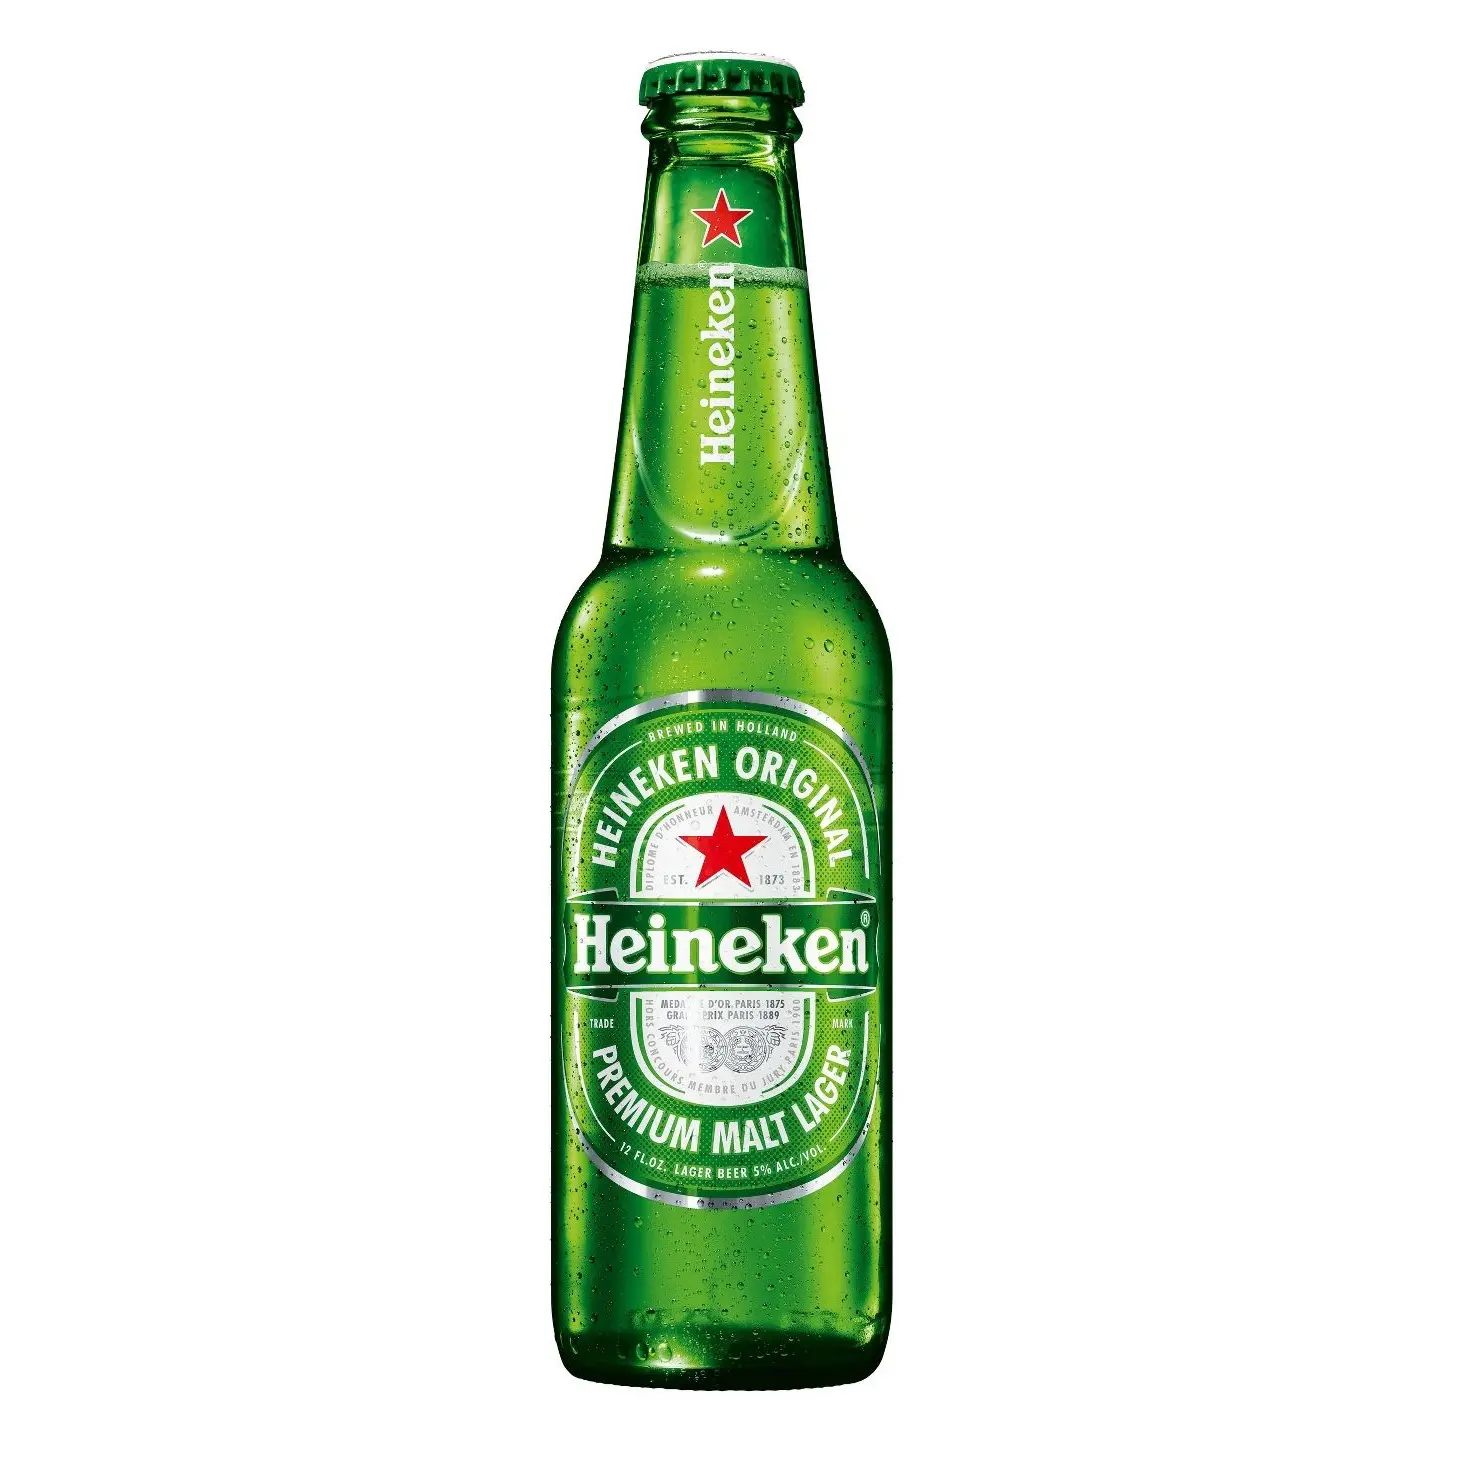 High Quality Heineken Premium Larger Beer Bottles 6 x 330ml Available For Sale At Low Price